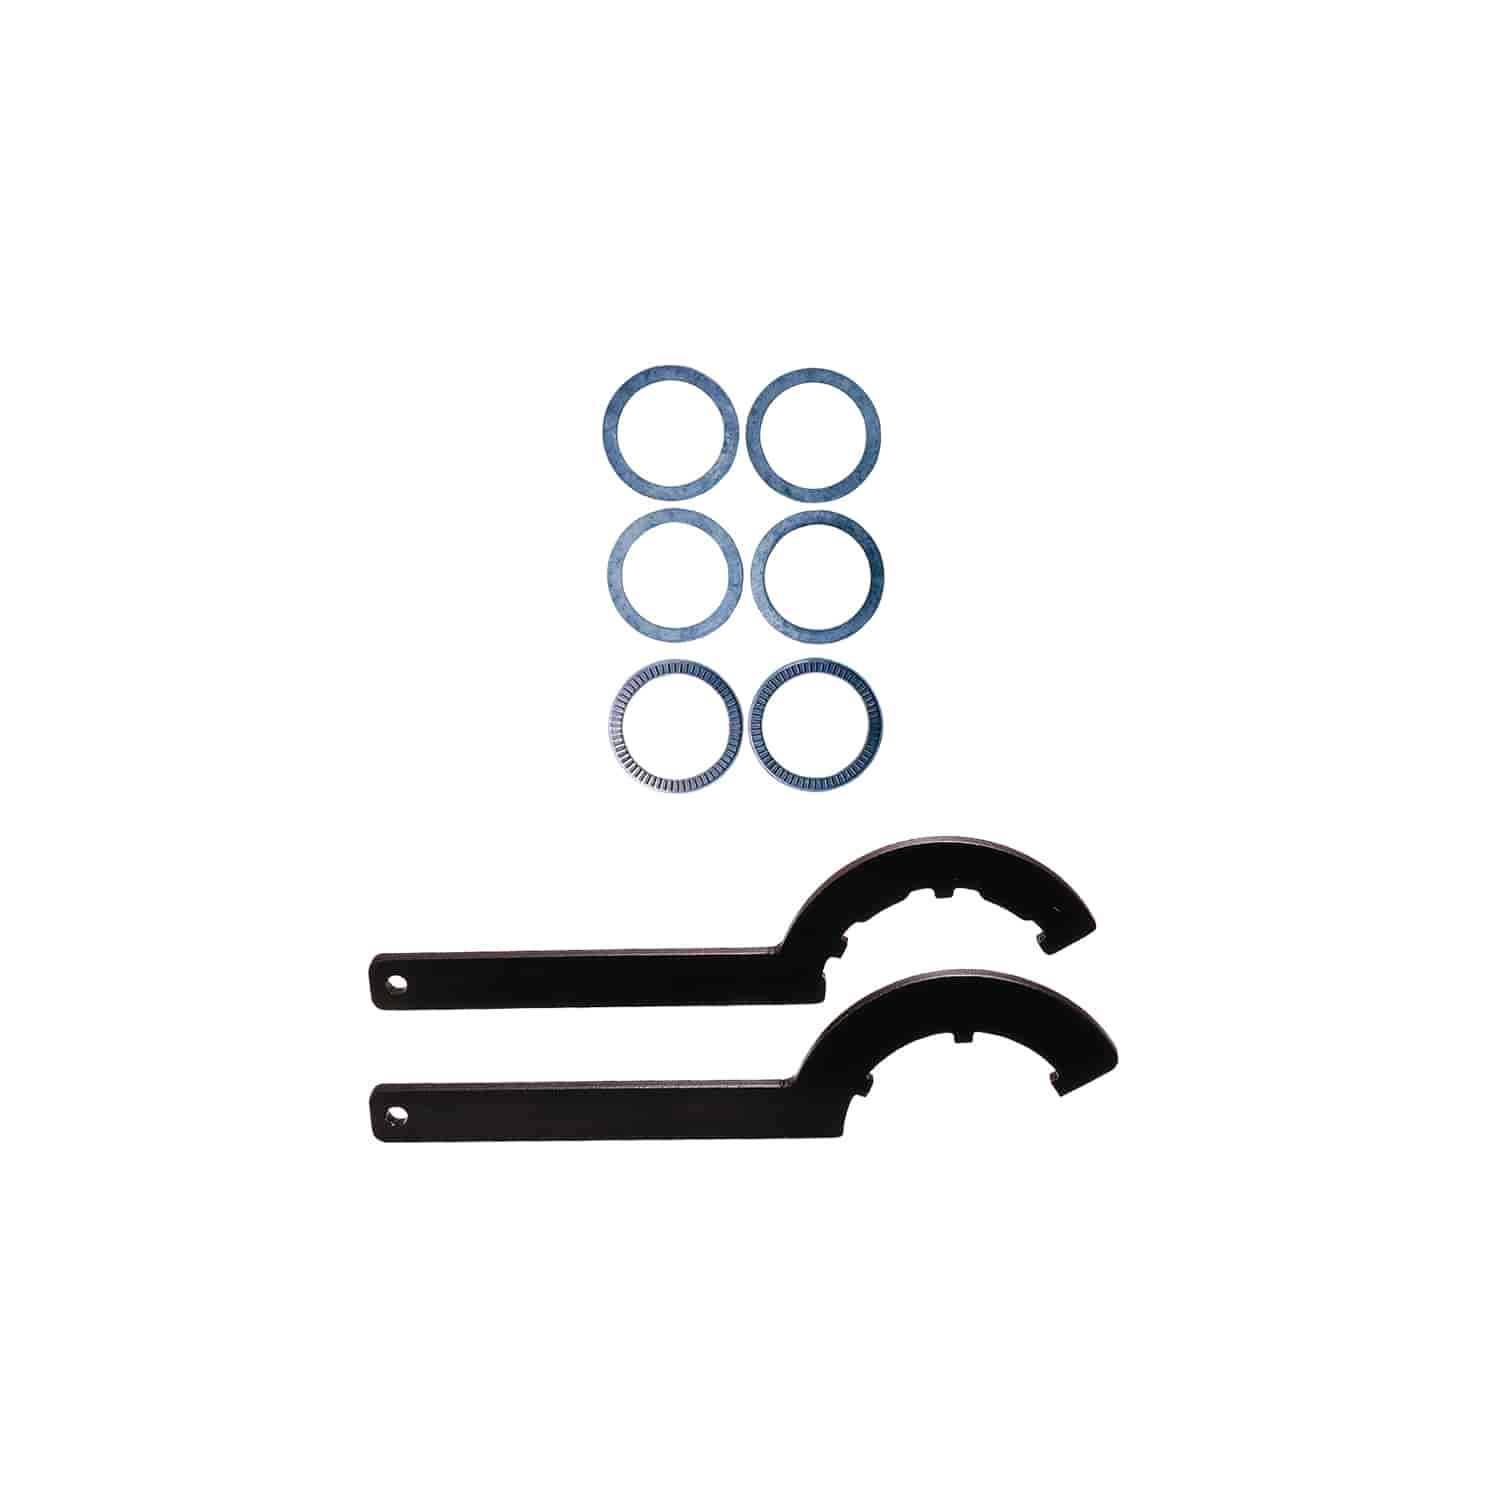 Spanner Wrench & Thrust Bearing Kit 2 each: spanner wrenches, thrust bearings & washers